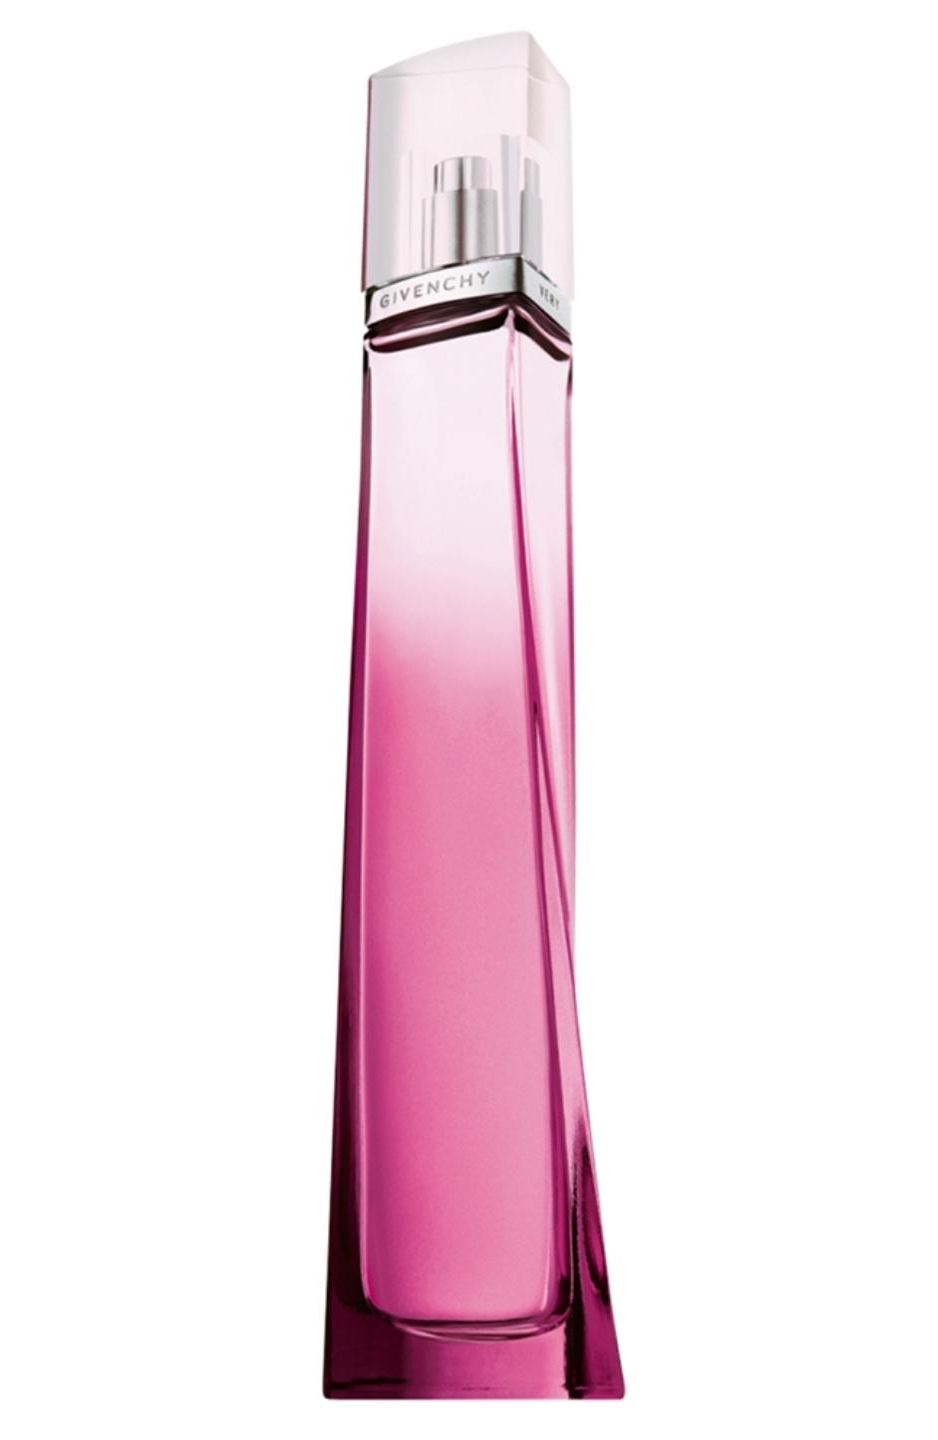 Very Irresistible Givenchy perfume - a fragrance for women 2003